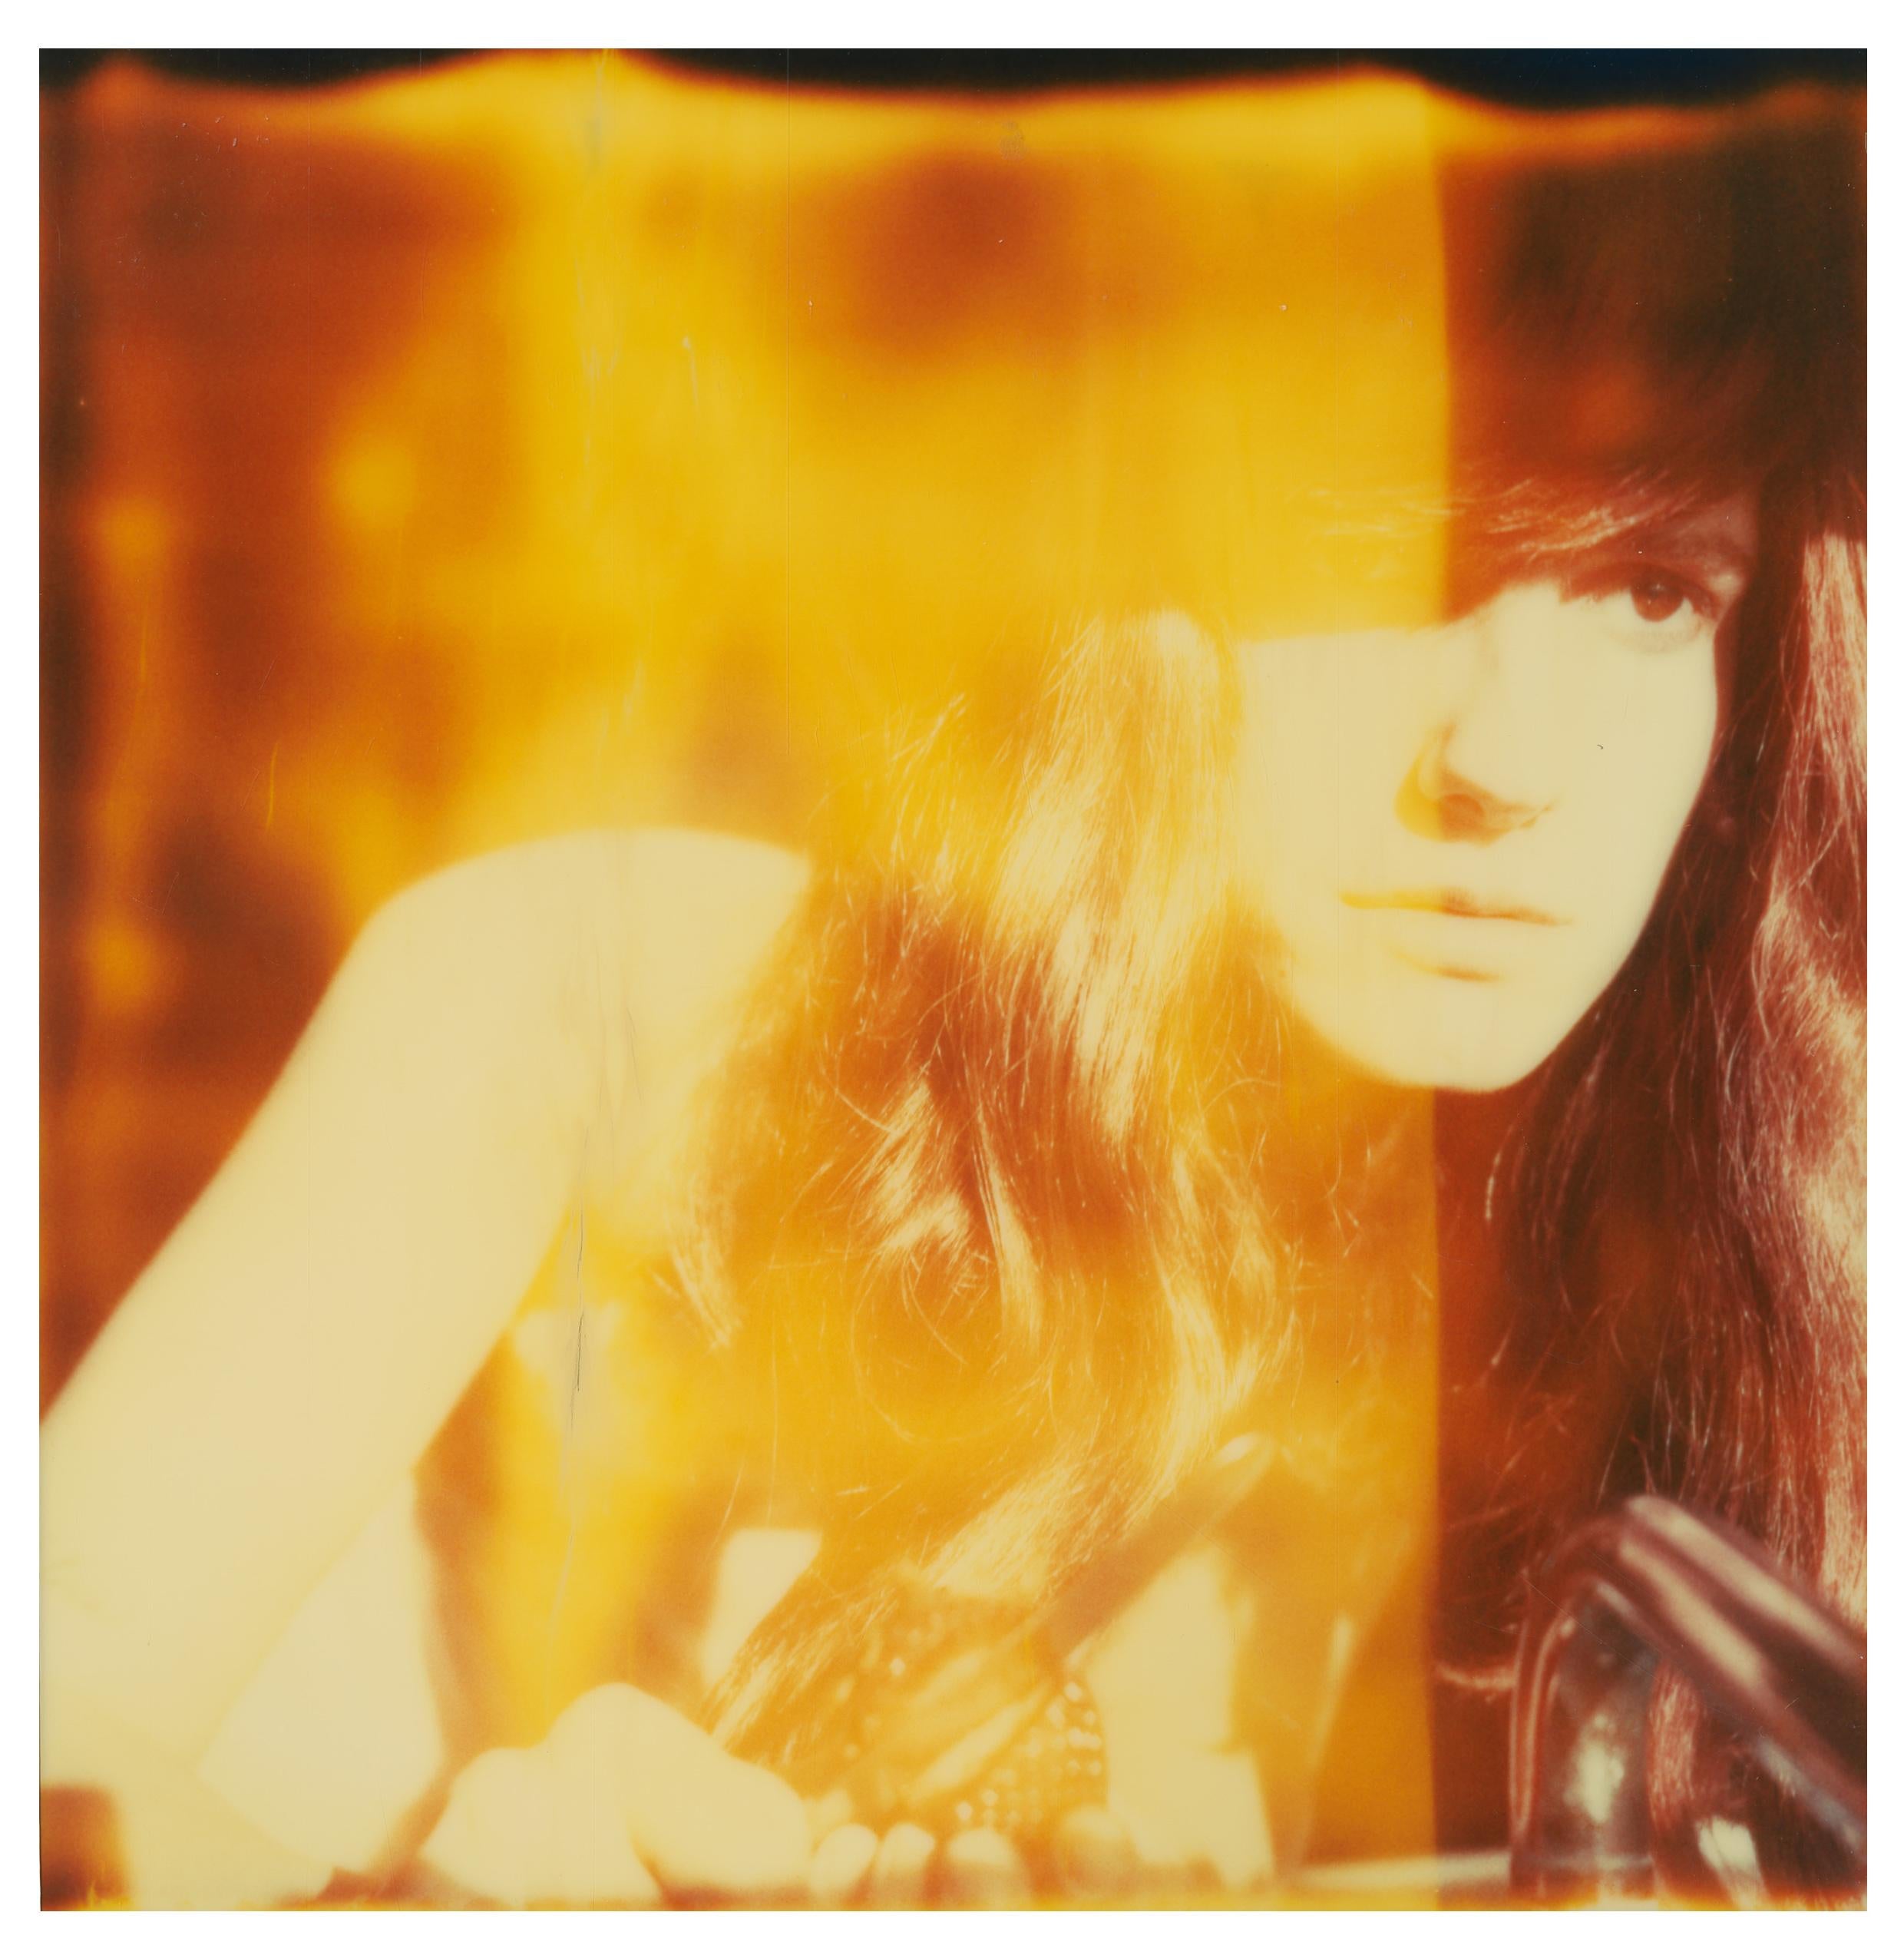 Stefanie Schneider Color Photograph - Burning (The Girl behind the White Picket Fence) Figurative, expired, Polaroid